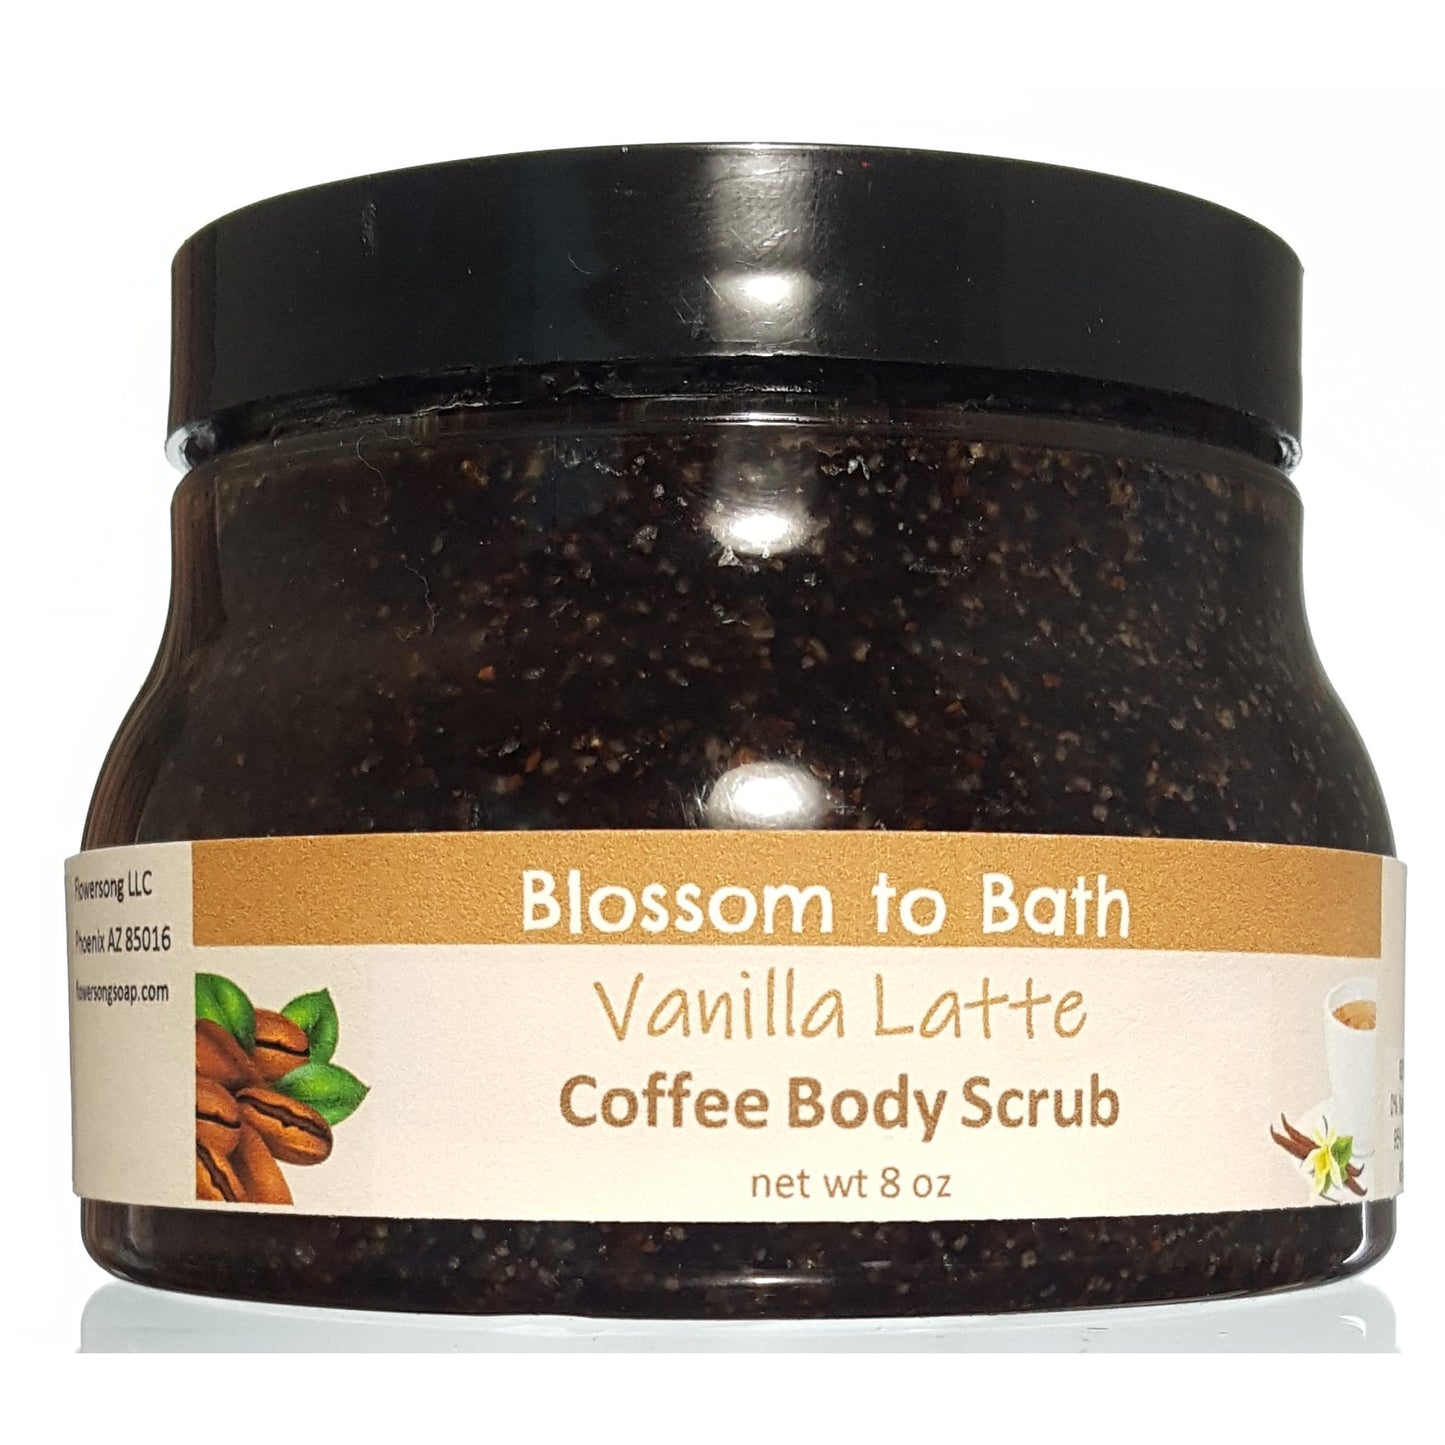 Buy Blossom to Bath Vanilla Latte Coffee Body Scrub from Flowersong Soap Studio.  Polish skin to a refreshed natural glow while enjoying your favorite mouth-watering gourmet coffee aroma  Sweetened vanilla combines with rich coffee to form the classic latte scent.